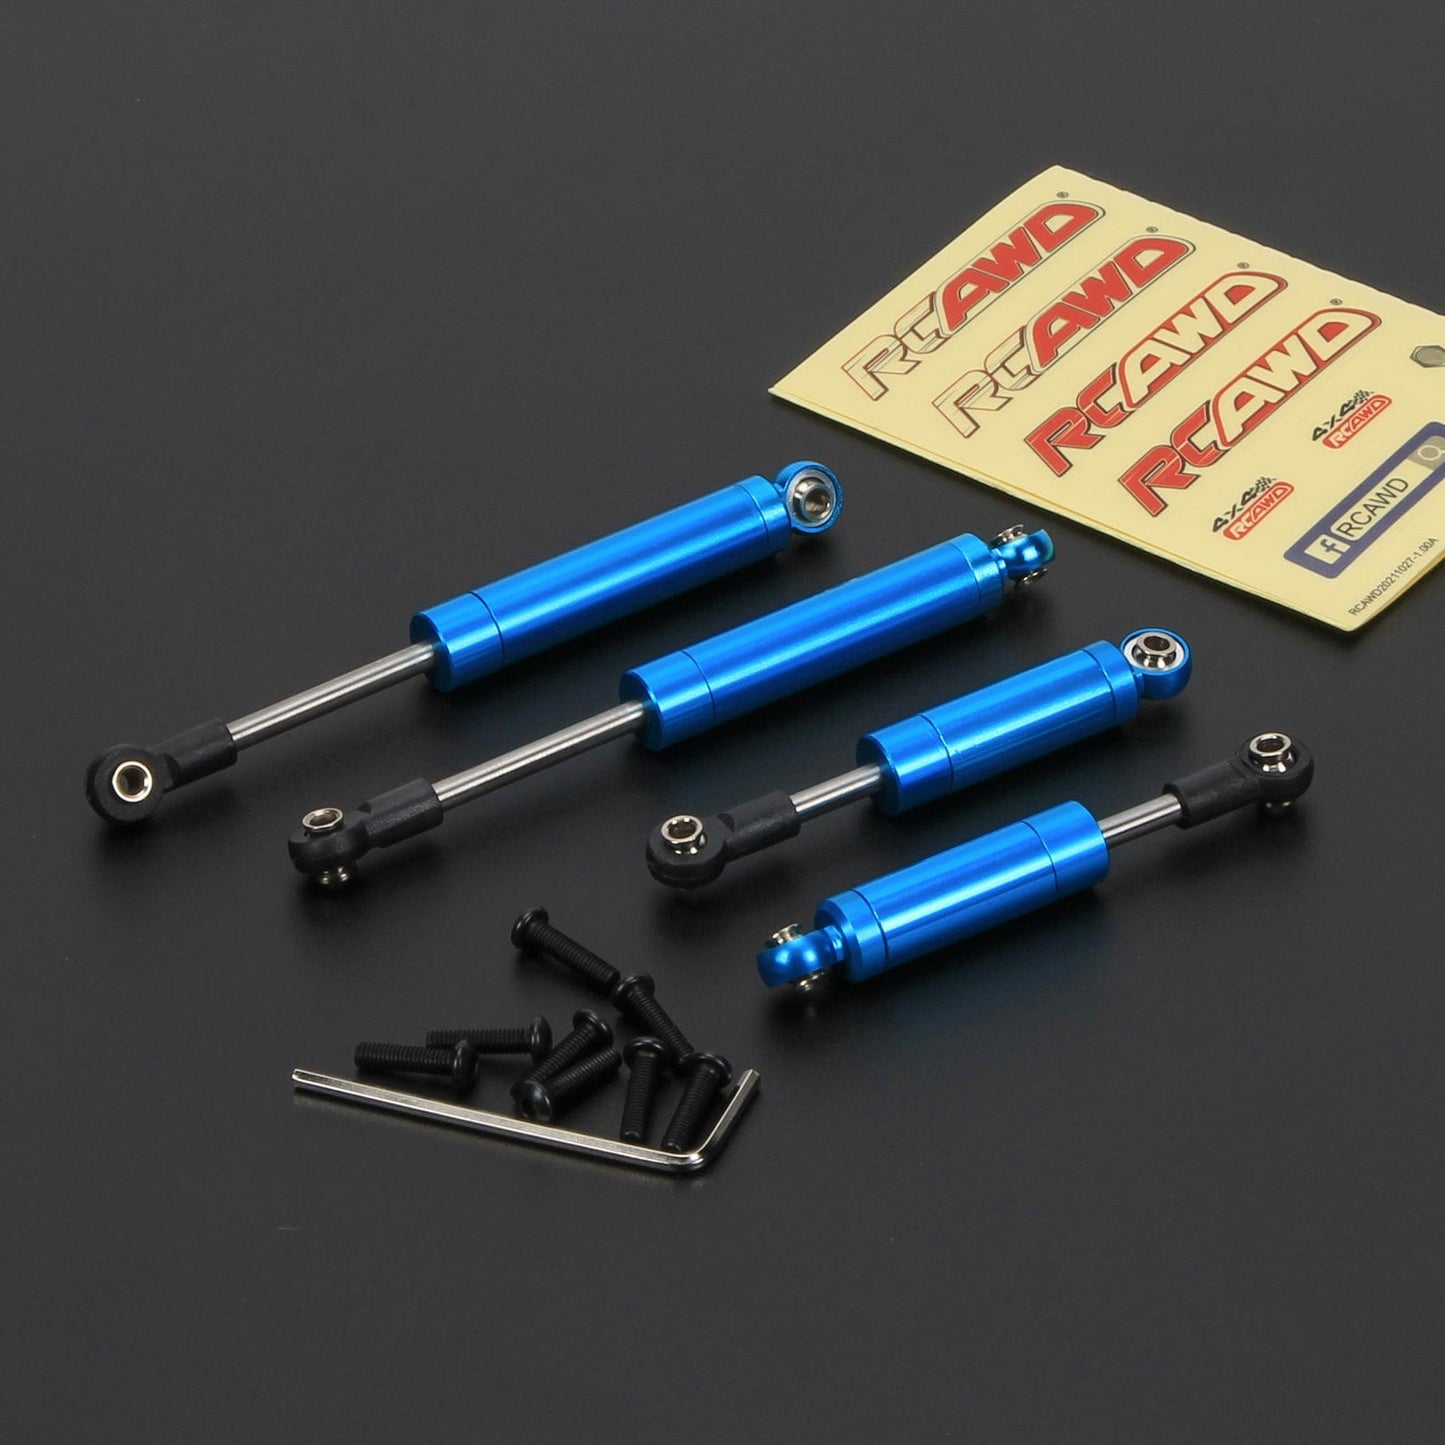 RCAWD Axial Yeti Jr Blue RCAWD Axial Yeti Jr Upgrades Aluminum 72mm102mm Shocks Absorber oil-filled type